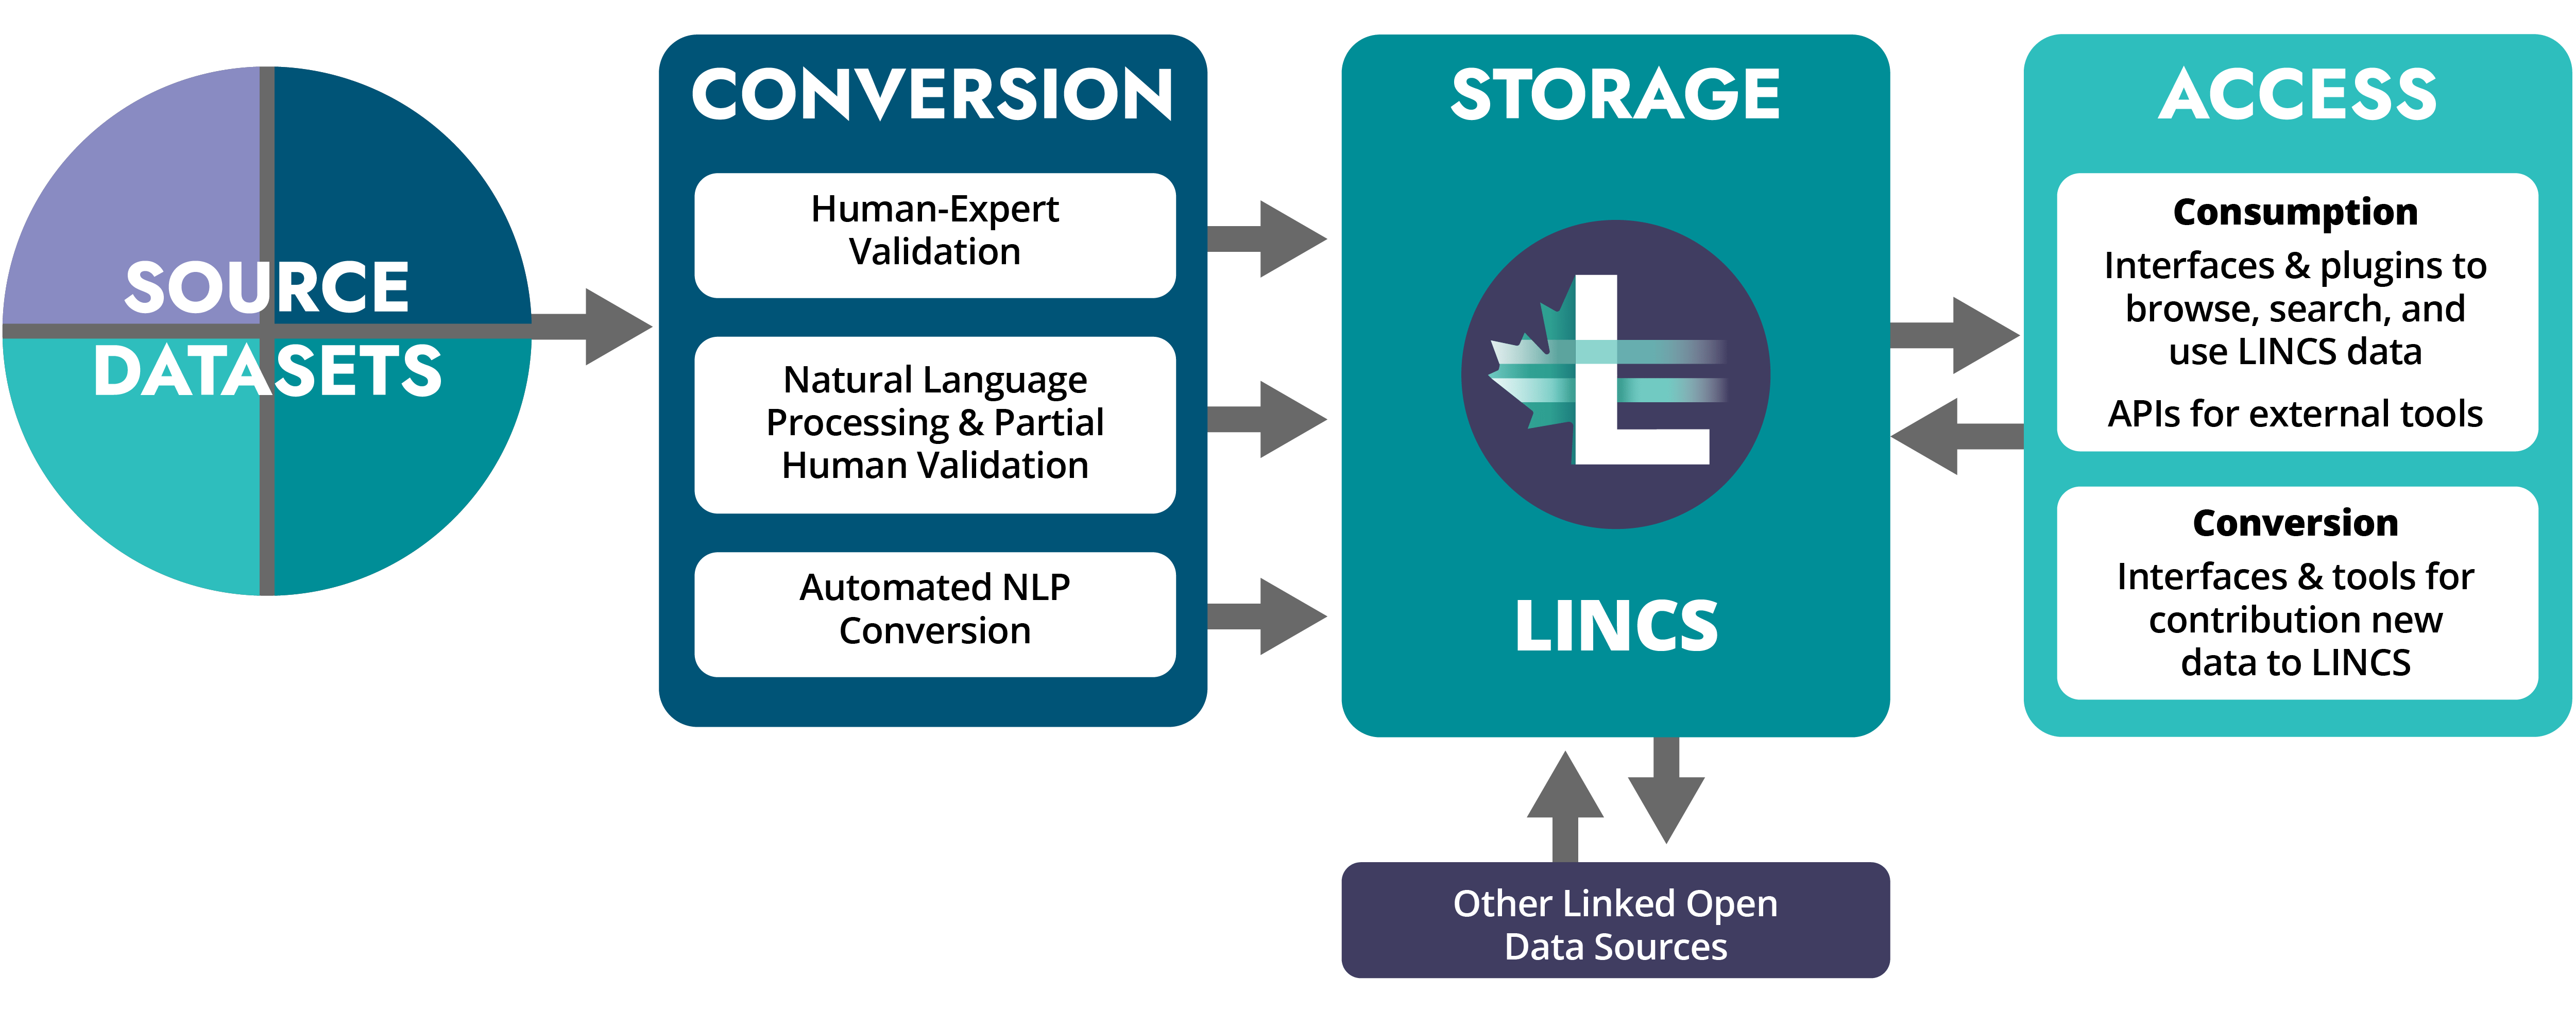 The LINCS infrastructure will support conversion of source datasets with automated natural language processing and human-expert validation. Converted data will be stored in the LINCS triplestore and linked to other open data sources. Access will be provided via consumption interfaces to search, browse, and use LINCS data and also to APIs for external tools. Conversion interfaces and tools for contributing new data to LINCS will also be part of Access